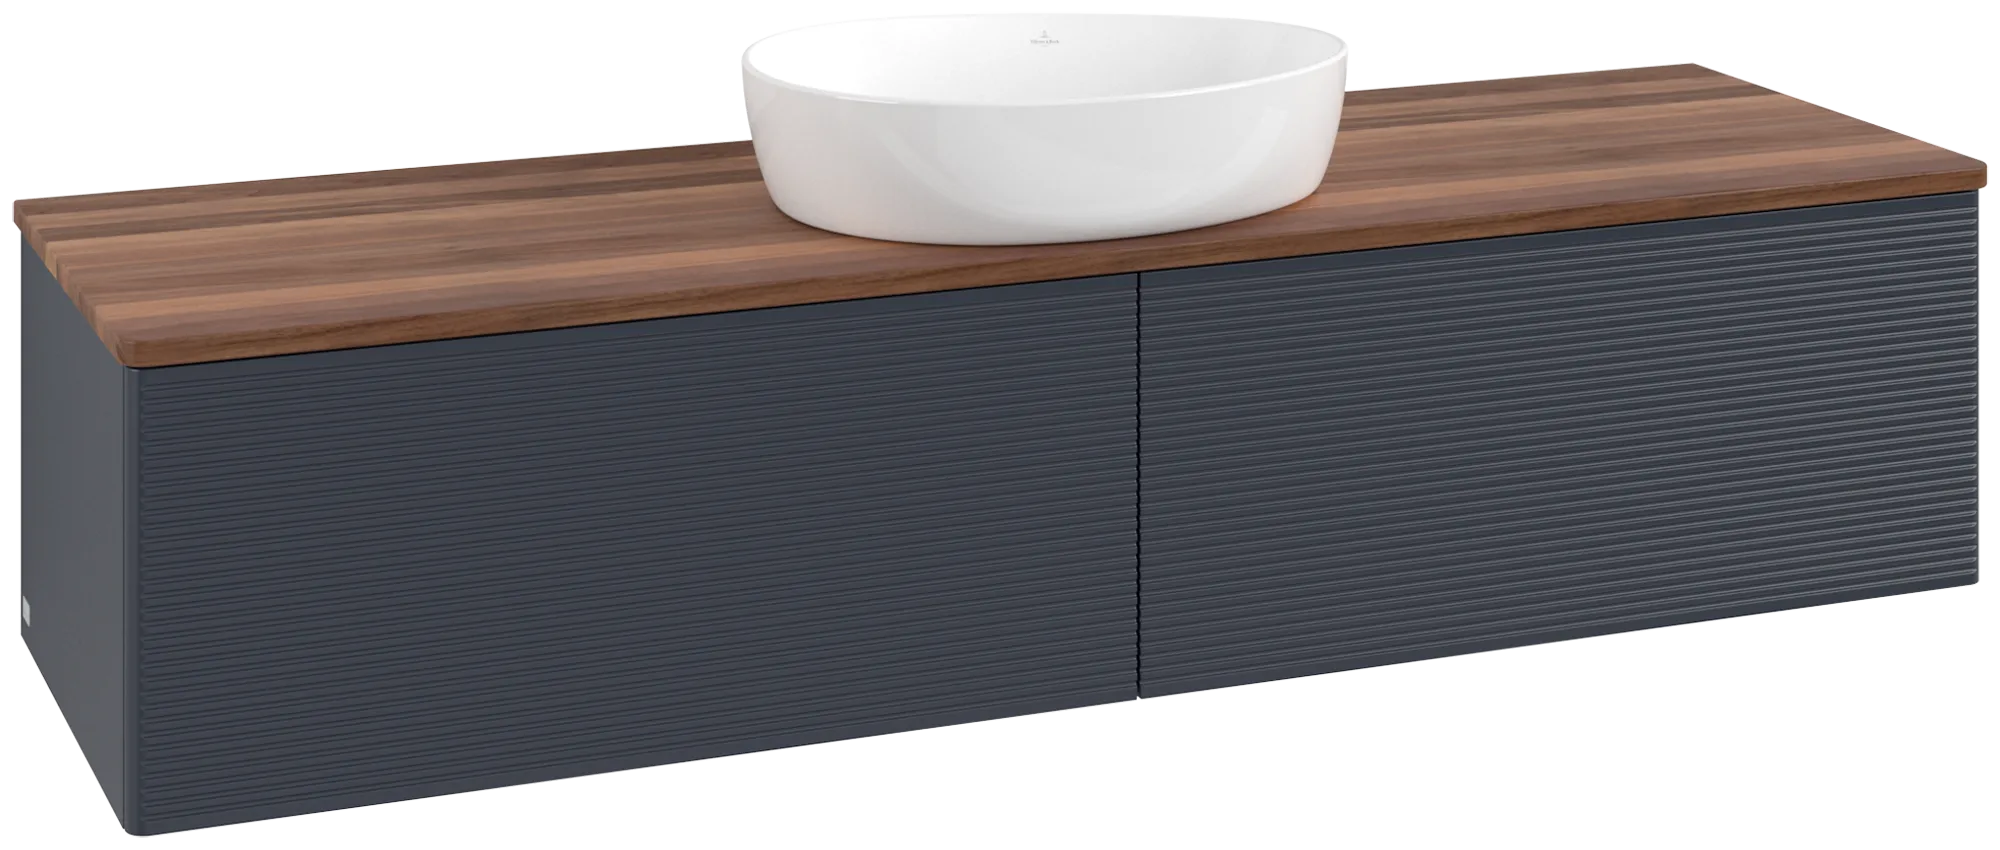 Picture of VILLEROY BOCH Antao Vanity unit, 2 pull-out compartments, 1600 x 360 x 500 mm, Front with grain texture, Midnight Blue Matt Lacquer / Warm Walnut #K36112HG